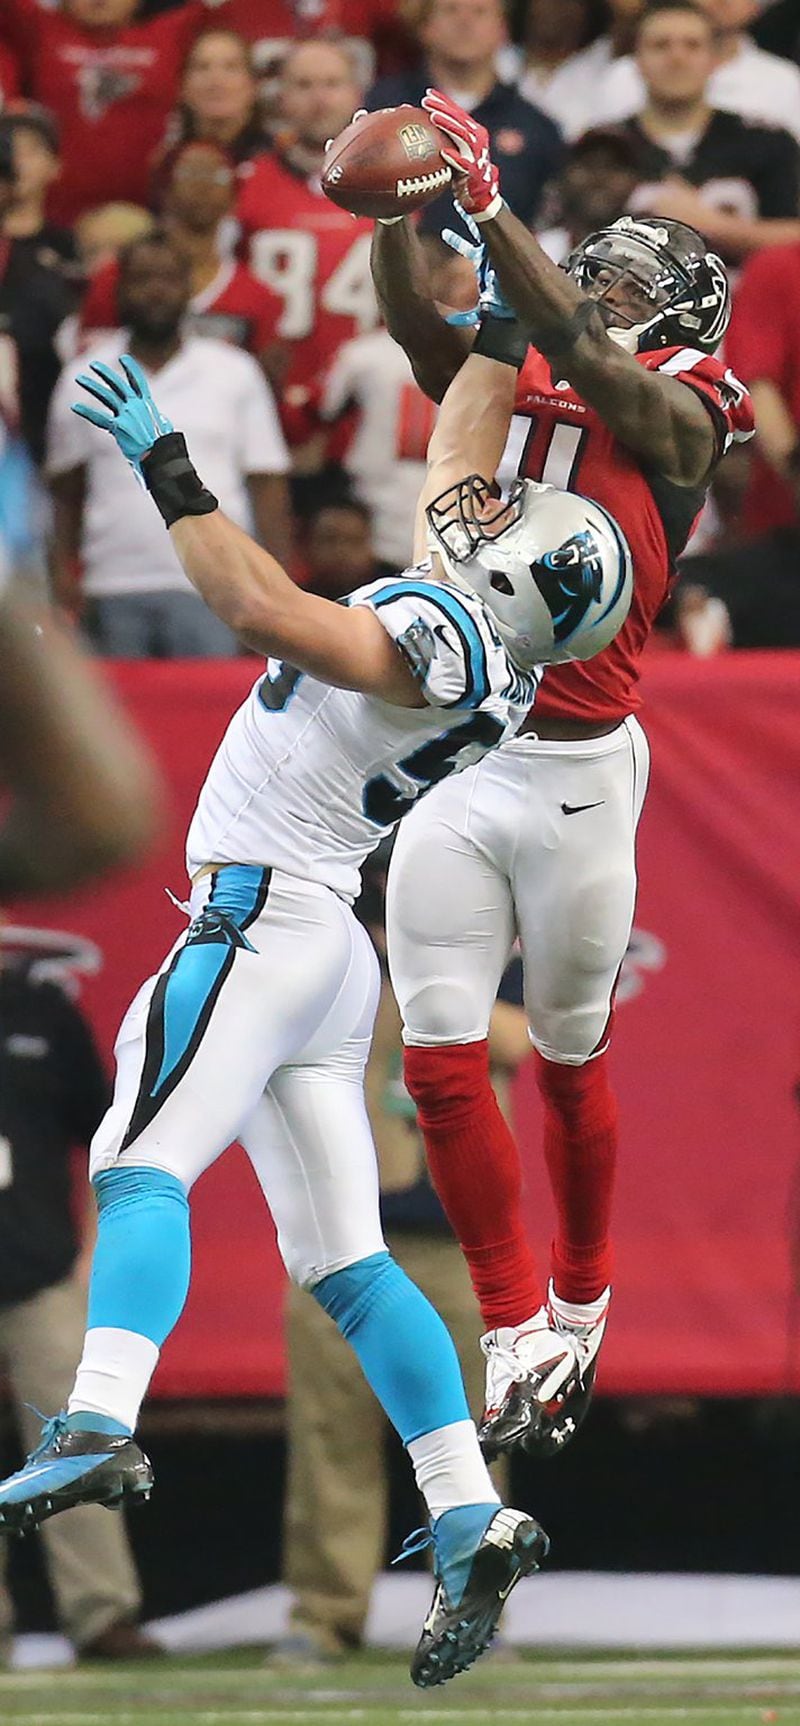 Falcons wide receiver Julio Jones goes up over Panthers linebacker Luke Kuechly for a long touchdown pass from Matt Ryan to take a 14-10 lead over the Panthers during the third quarter in a football game on Sunday, Dec. 27, 2015, in Atlanta. The Falcons ended the Panthers perfect season with a 20-13 victory. Curtis Compton / ccompton@ajc.com